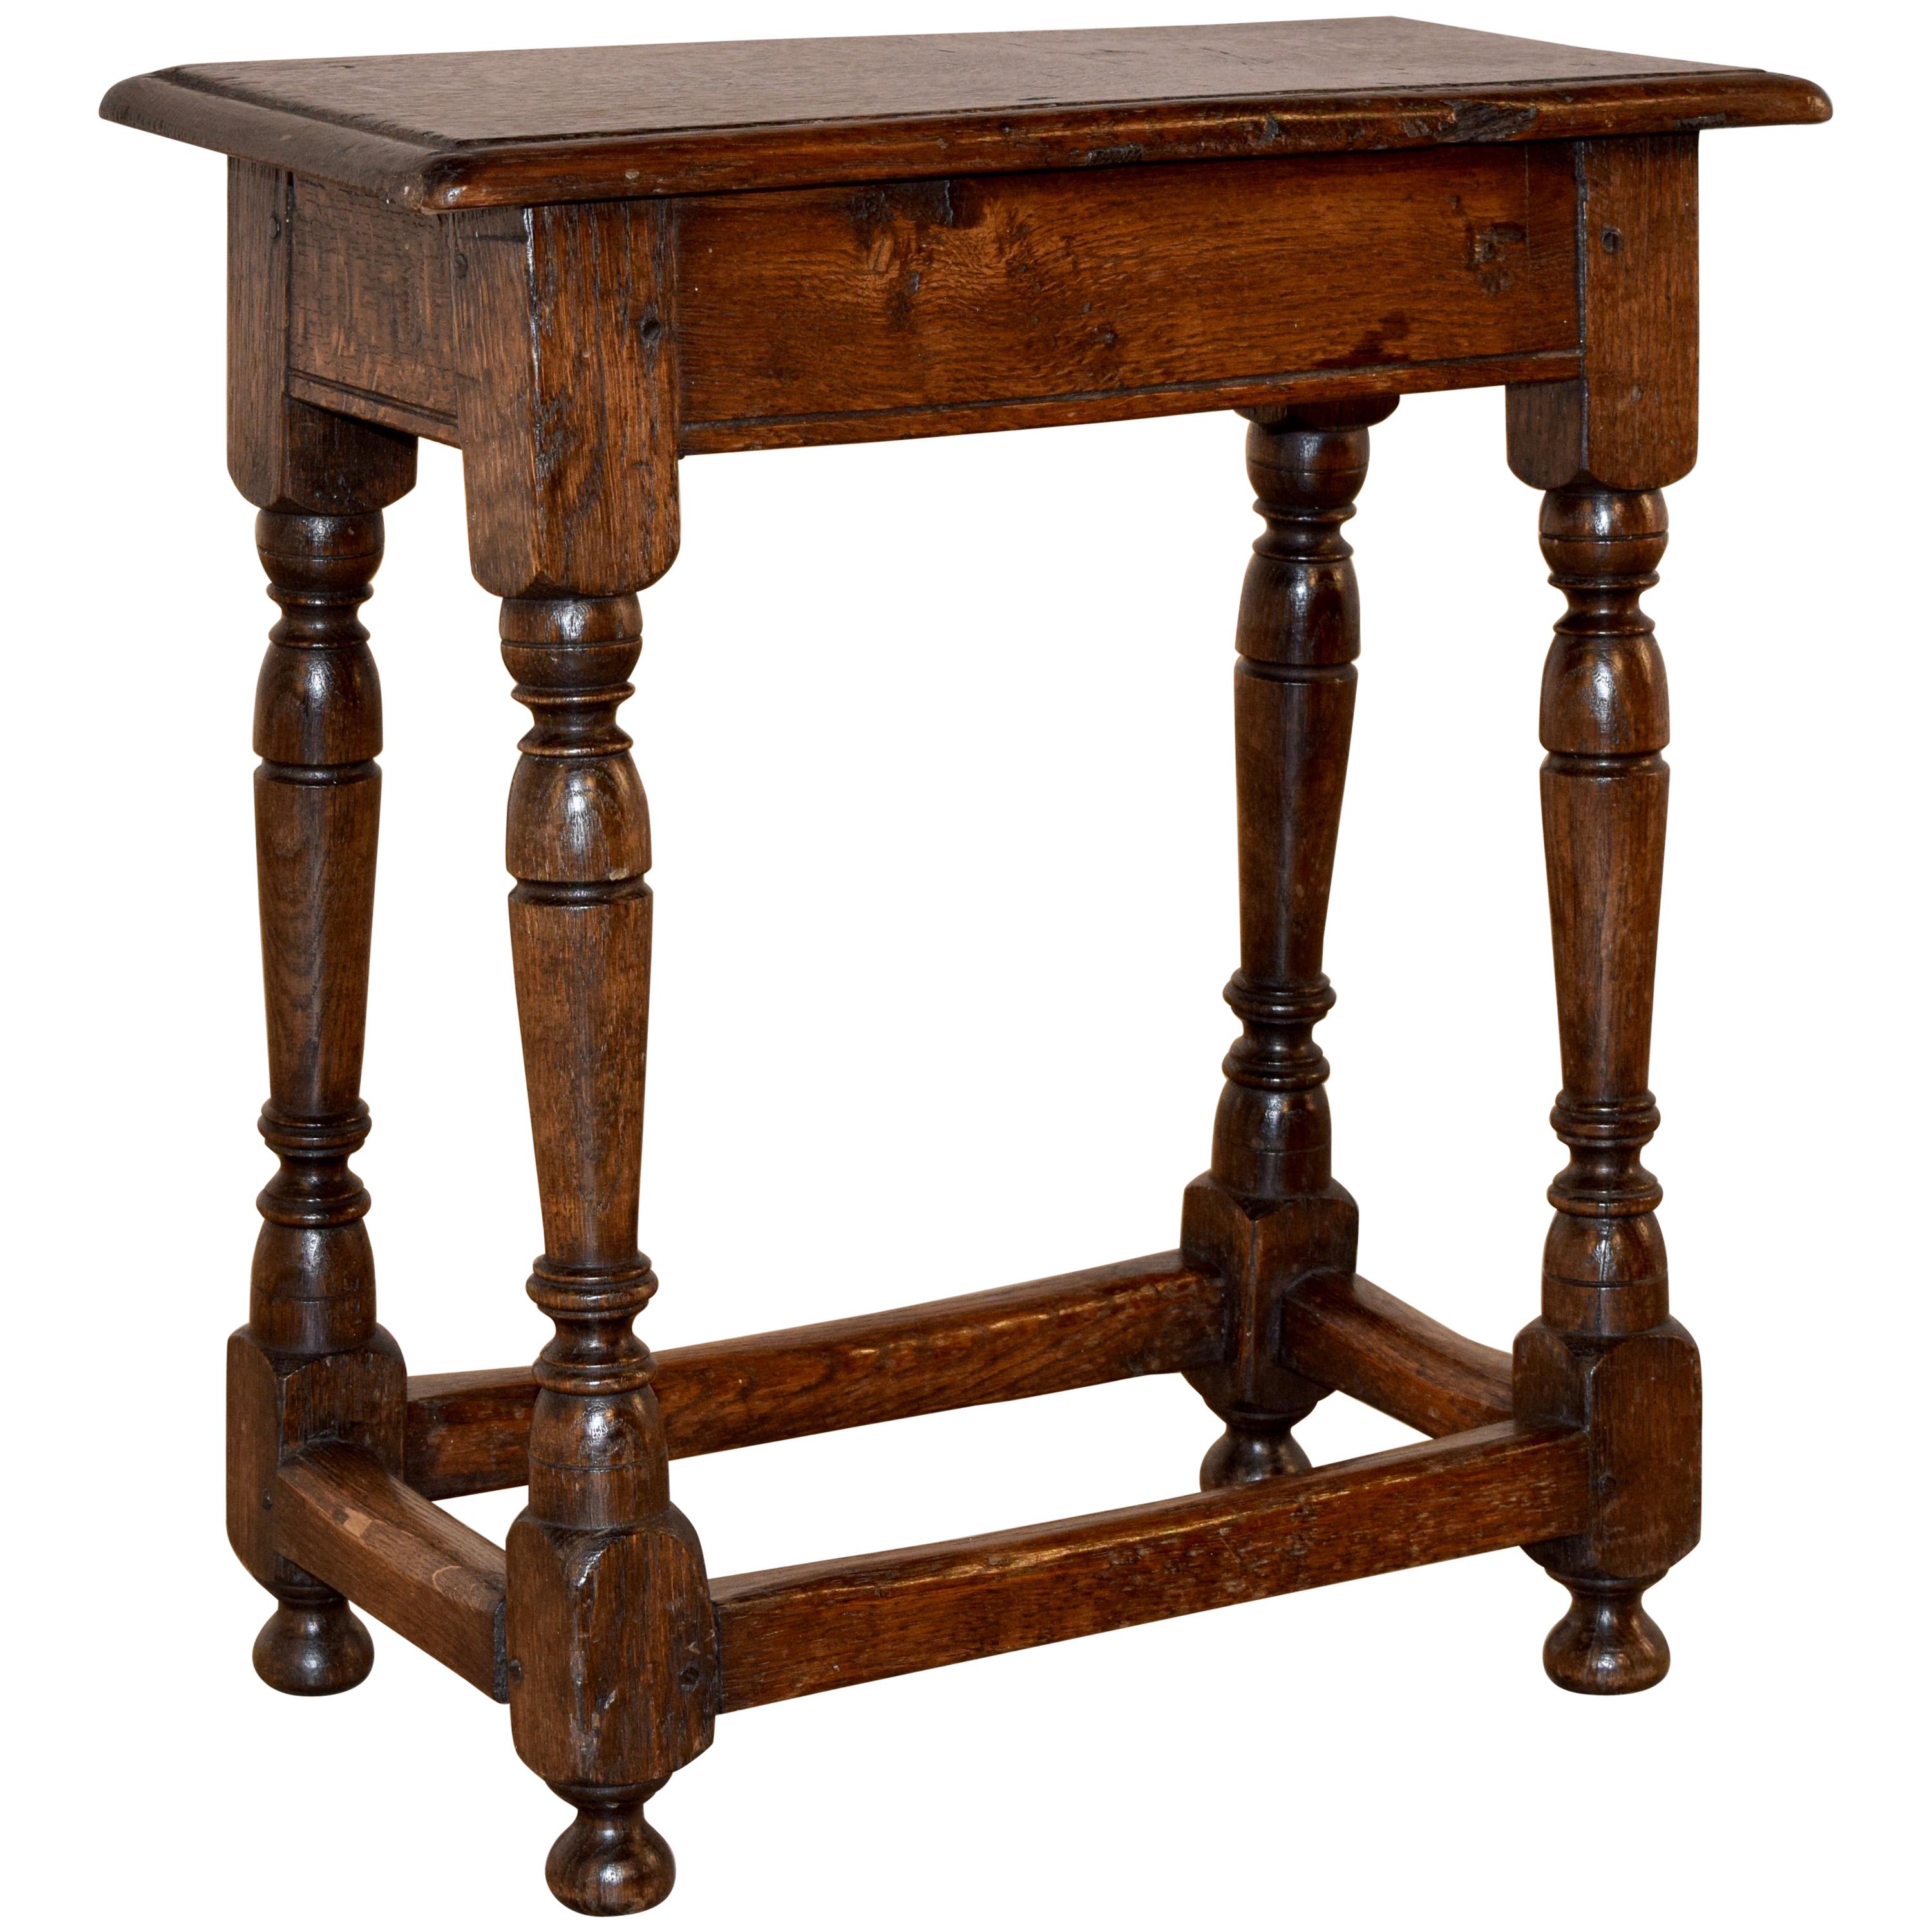 Early 19th Century English Joint Stool